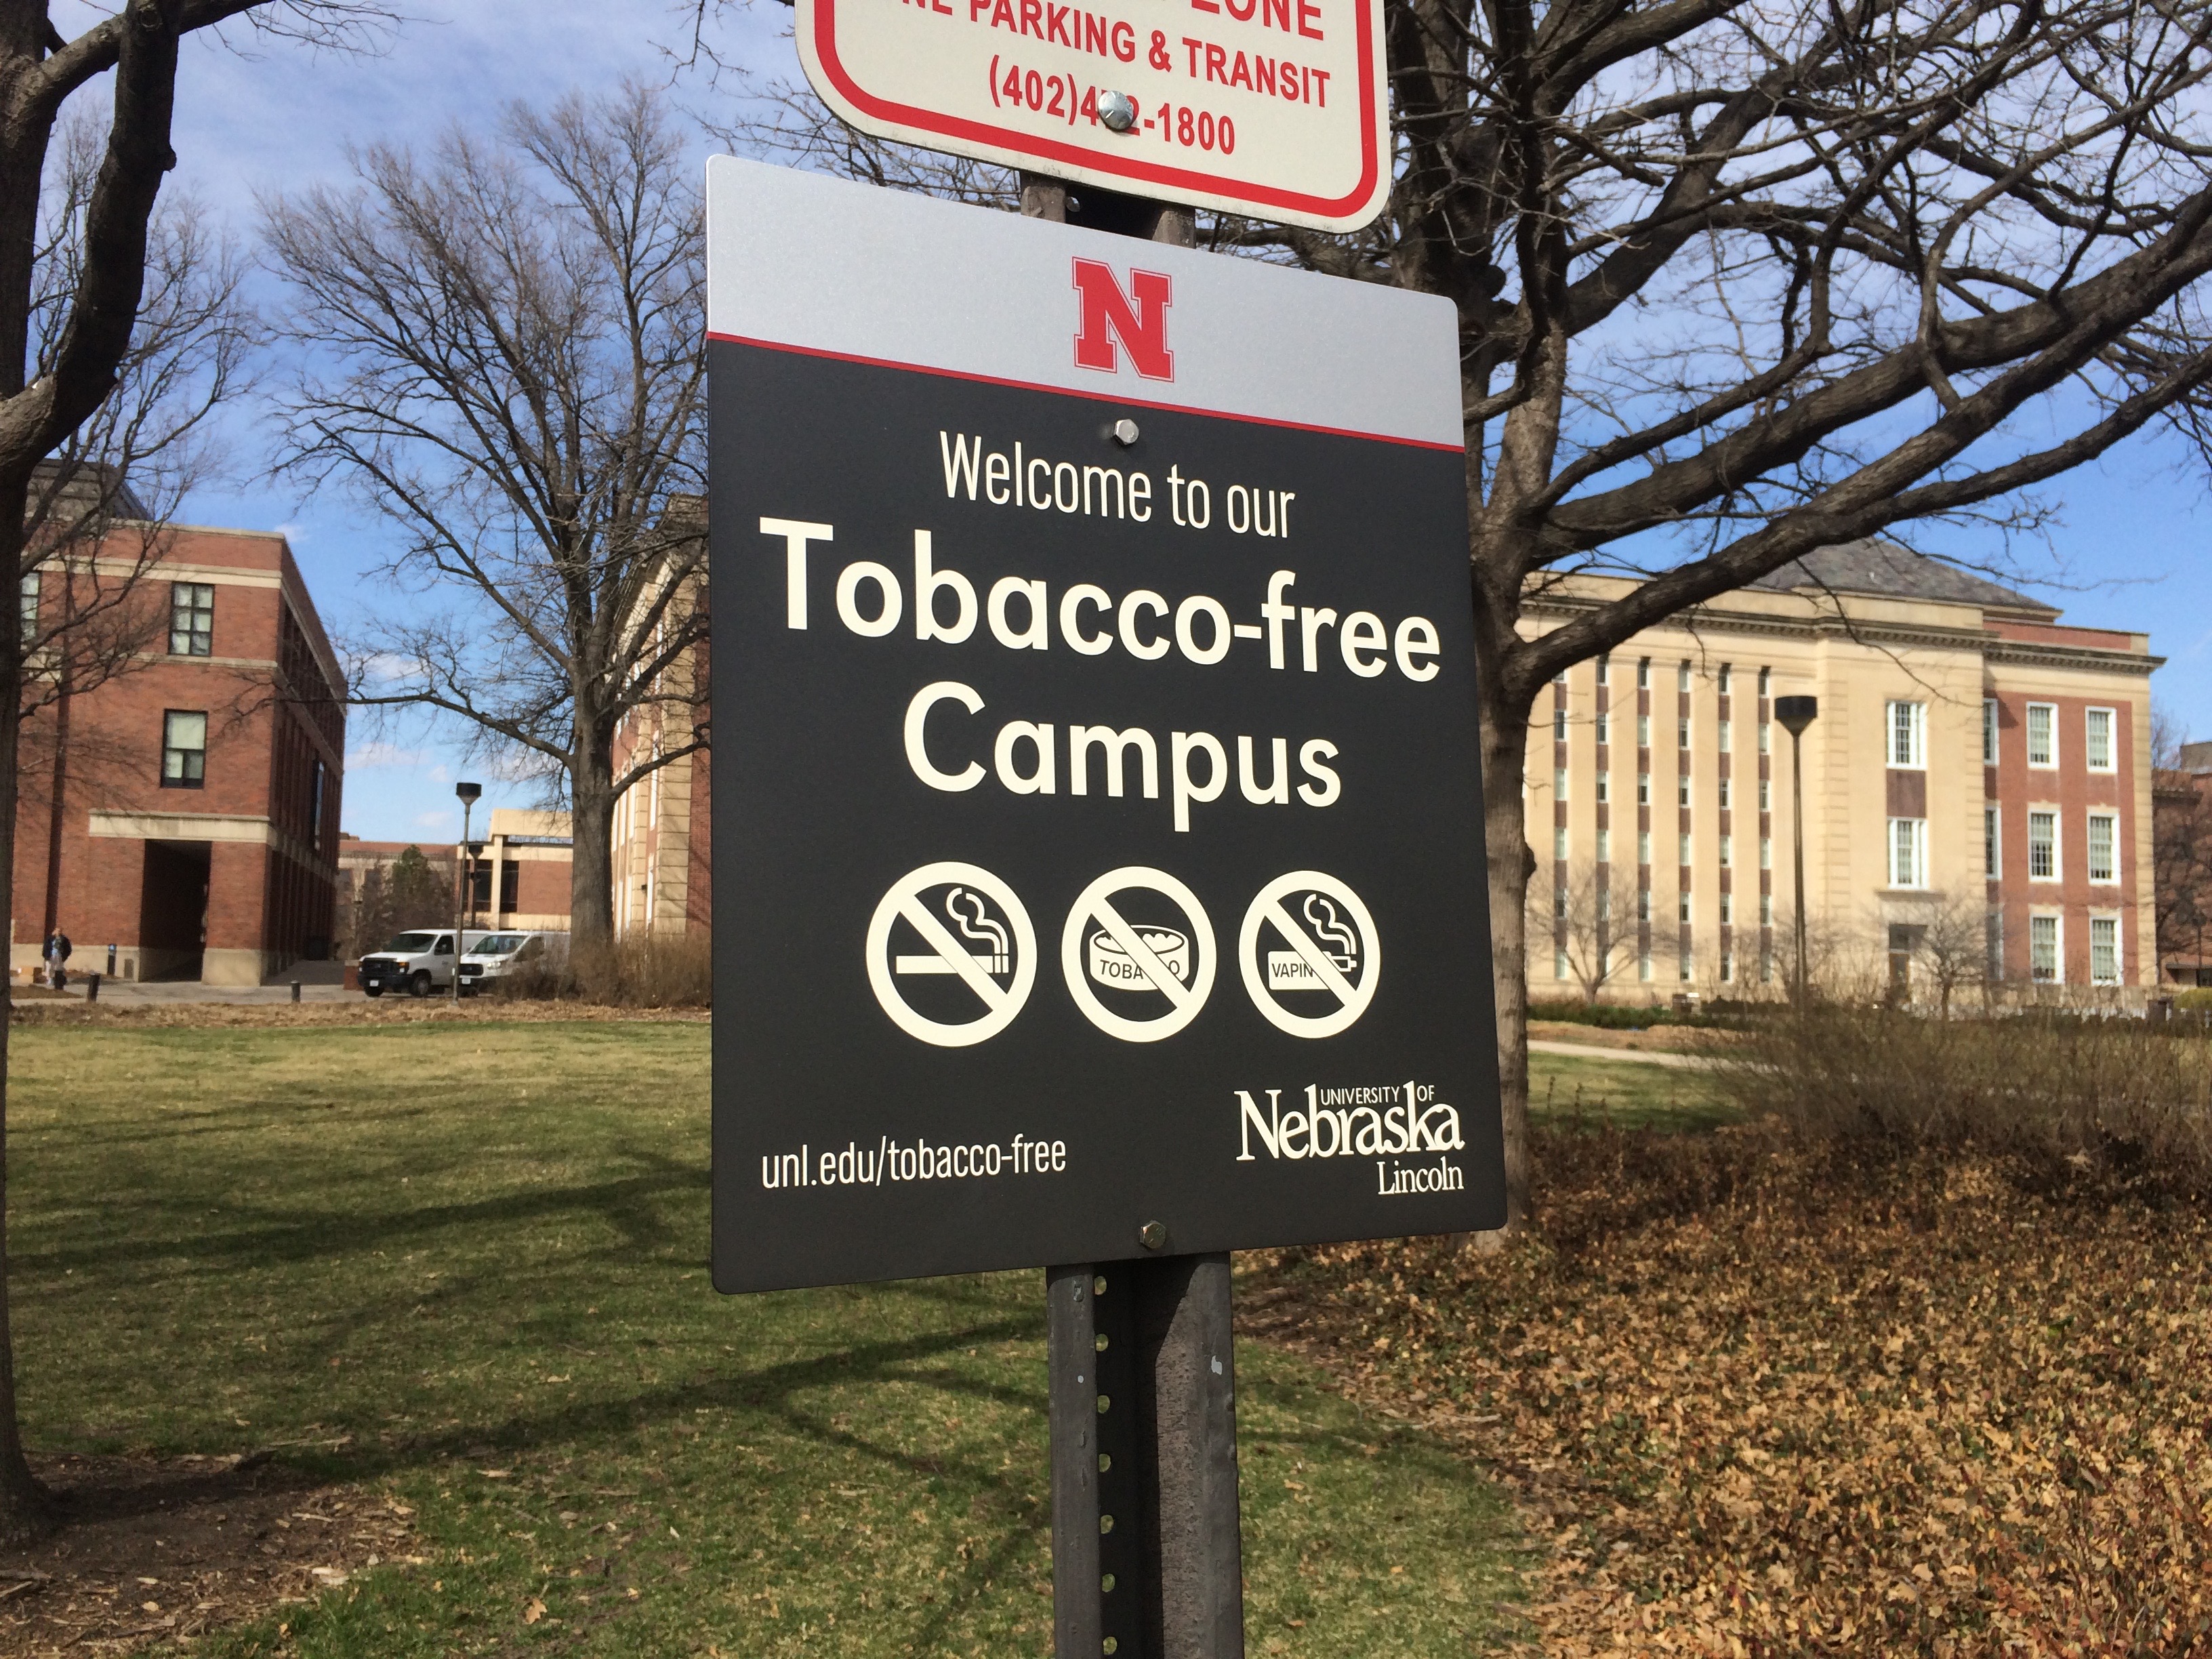 The university enacted a tobacco-free policy on January 1, 2018.